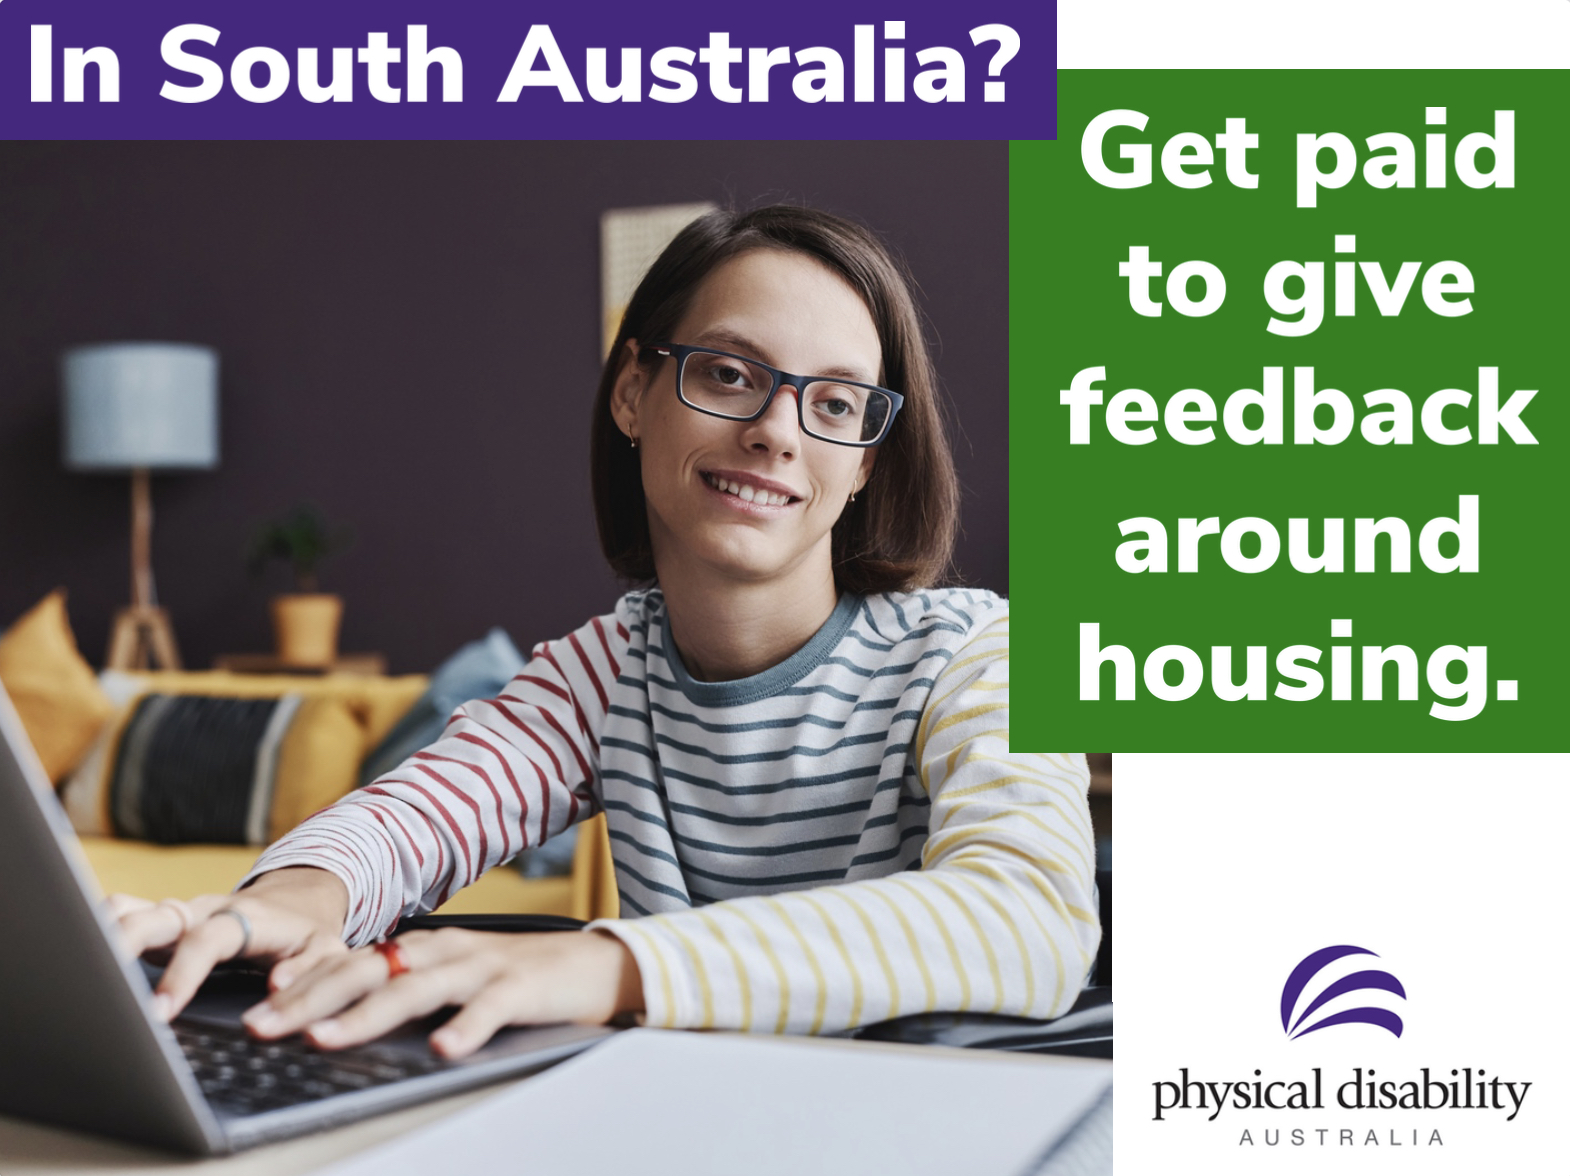 PAID OPPORTUNITY FOR SOUTH AUSTRALIANS LIVING WITH PHYSICAL DISABILITY TO SHARE THEIR HOUSING EXPERIENCES.